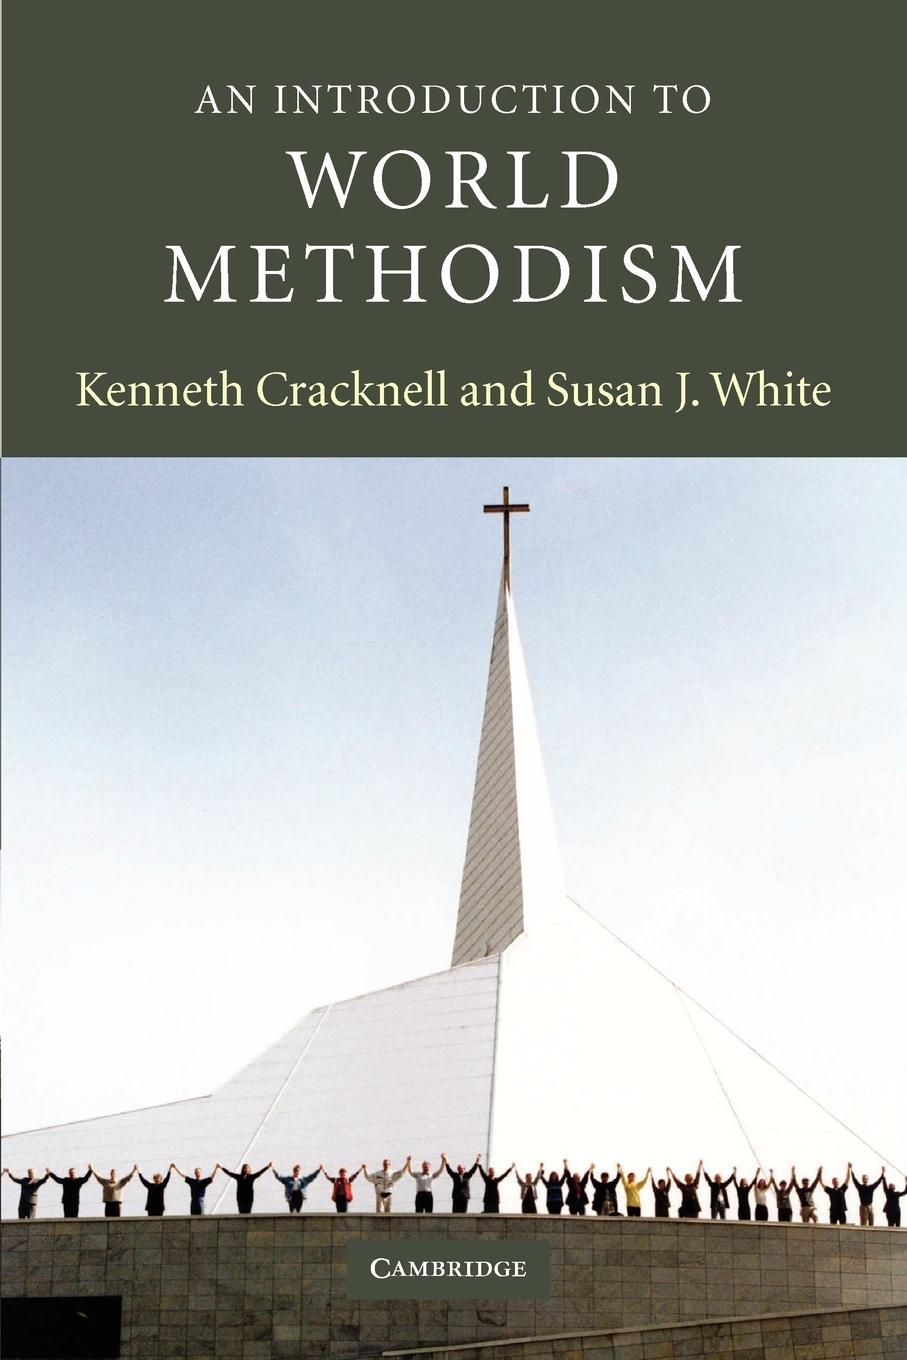 An Introduction to World Methodism - Cracknell, Kenneth White, Susan J.